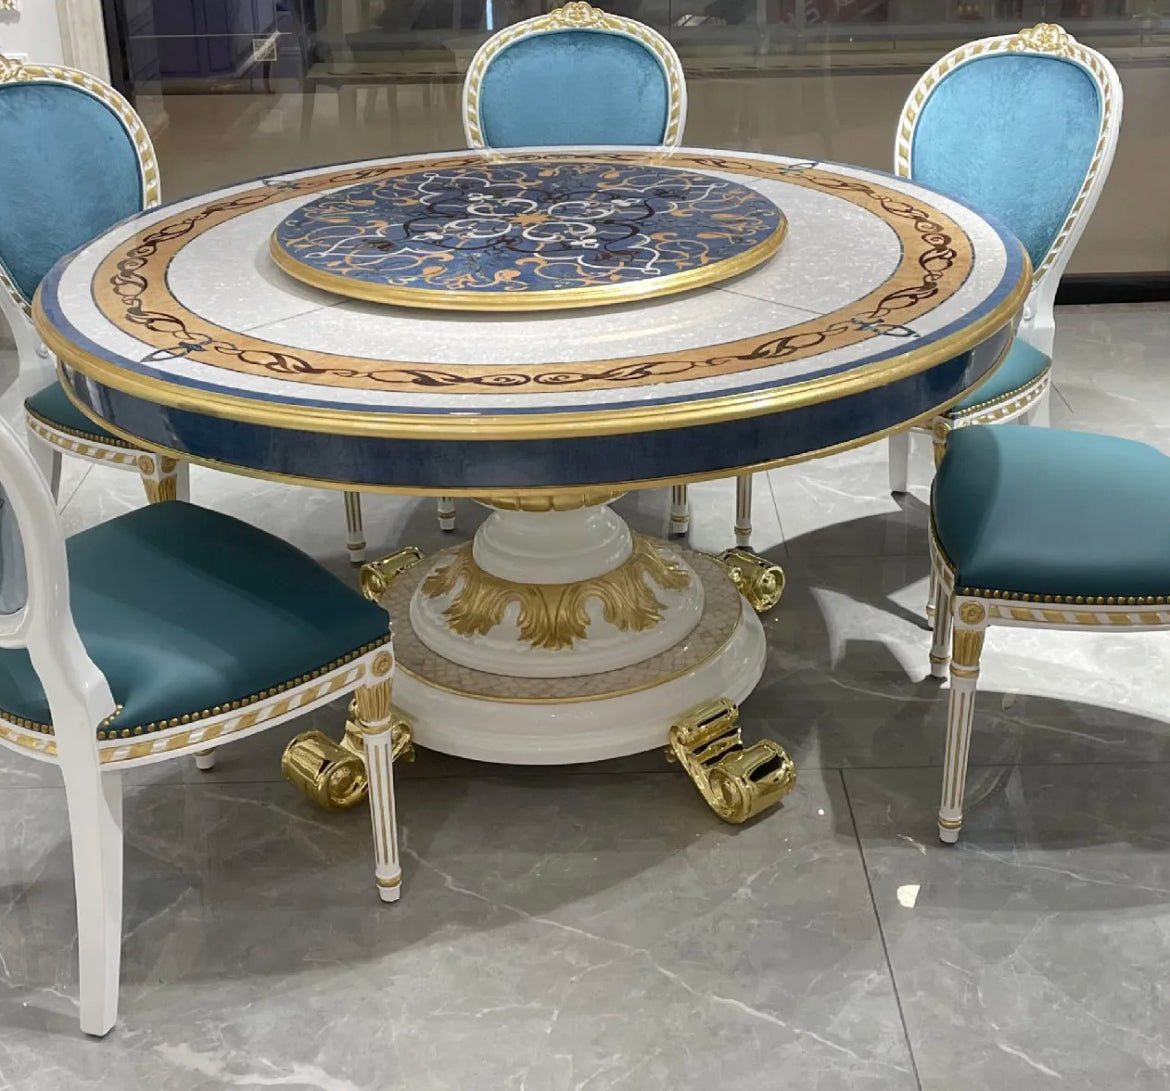 Barock Style Dining Table Nordic Luxury Antique Gold Round Dining Table Set